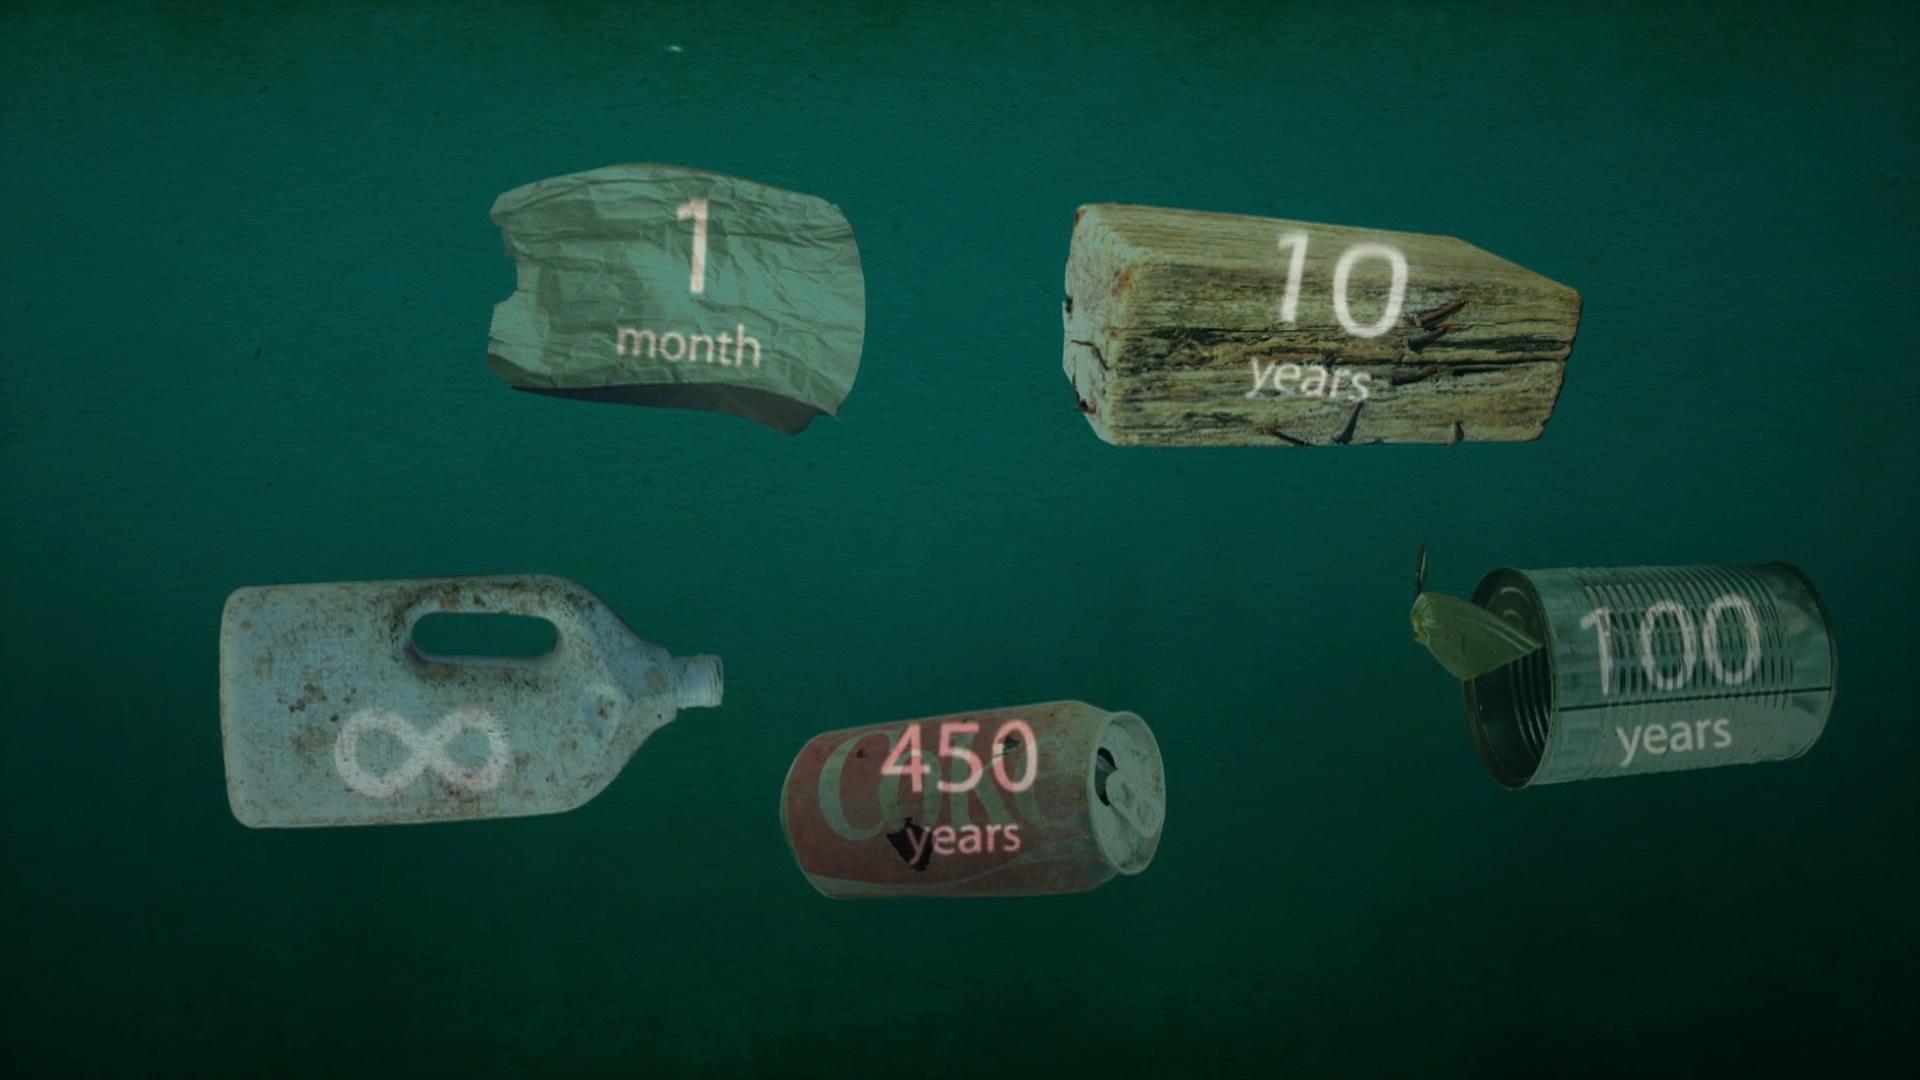 Over time, paper, wood, and metal will biodegrade in salt water. But plastic breaks apart into an infinite number of micro-plastics.